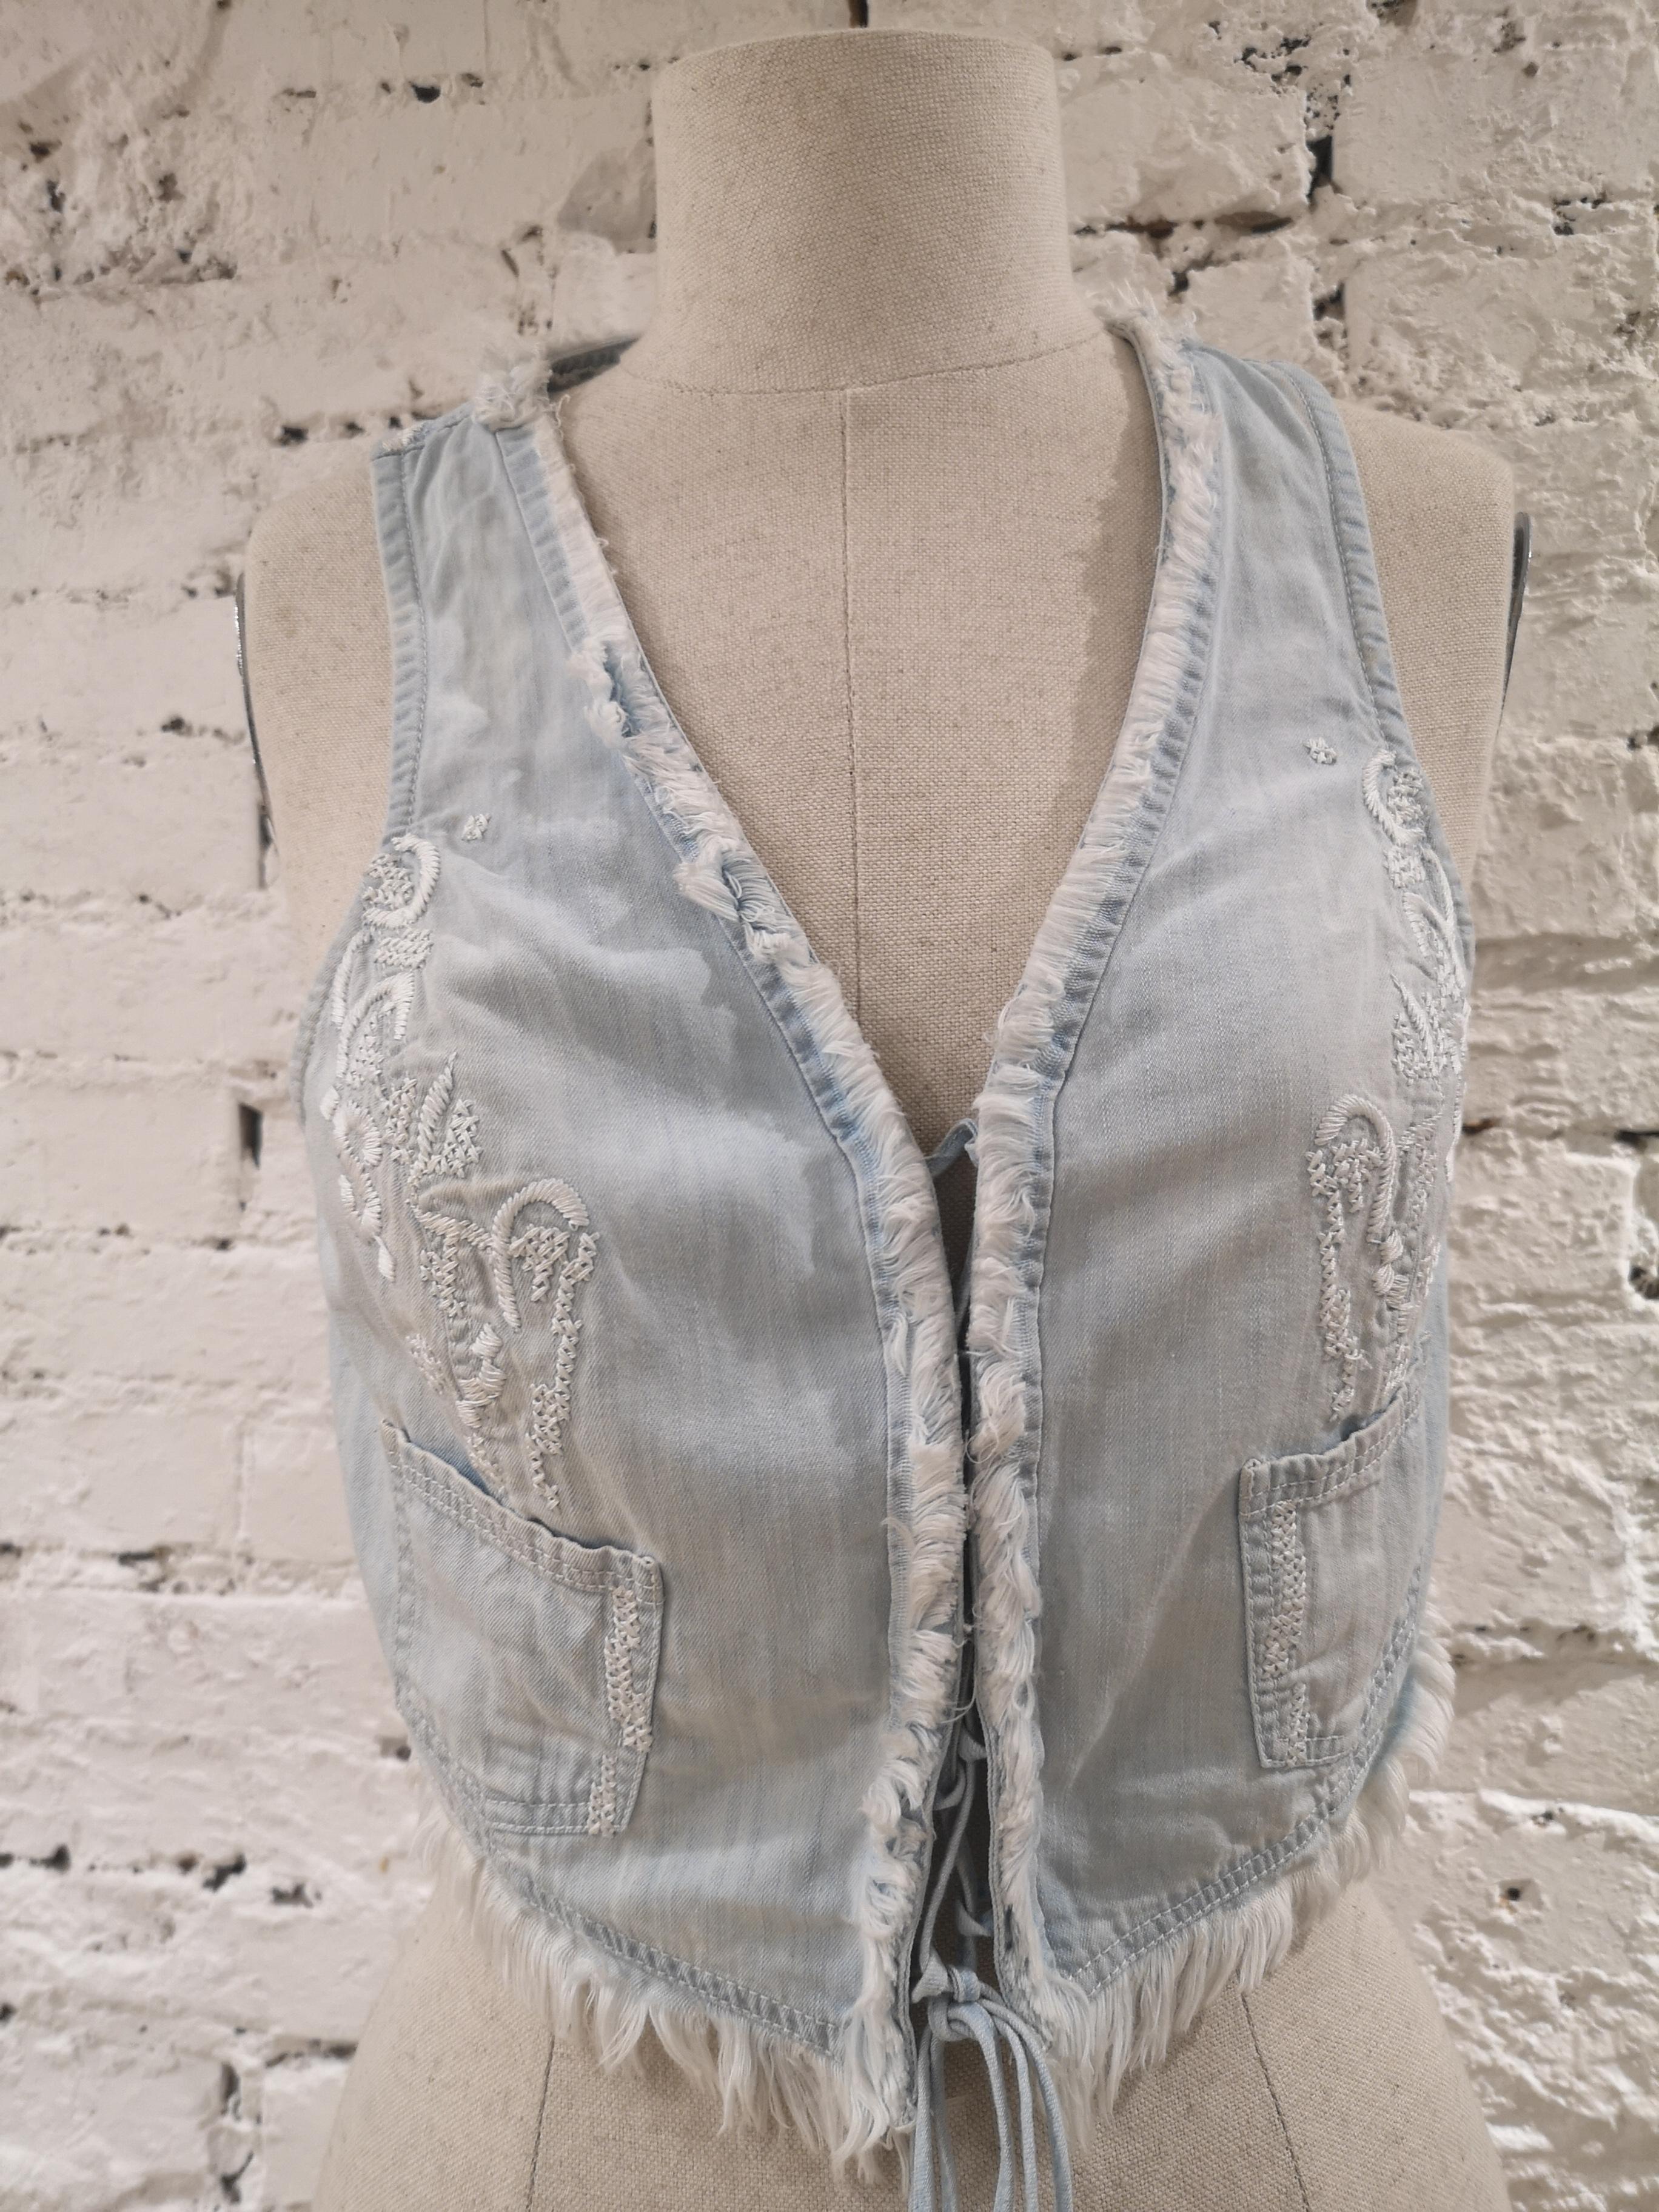 Scervino light blue cotton denim vest
totally made in italy
size 44